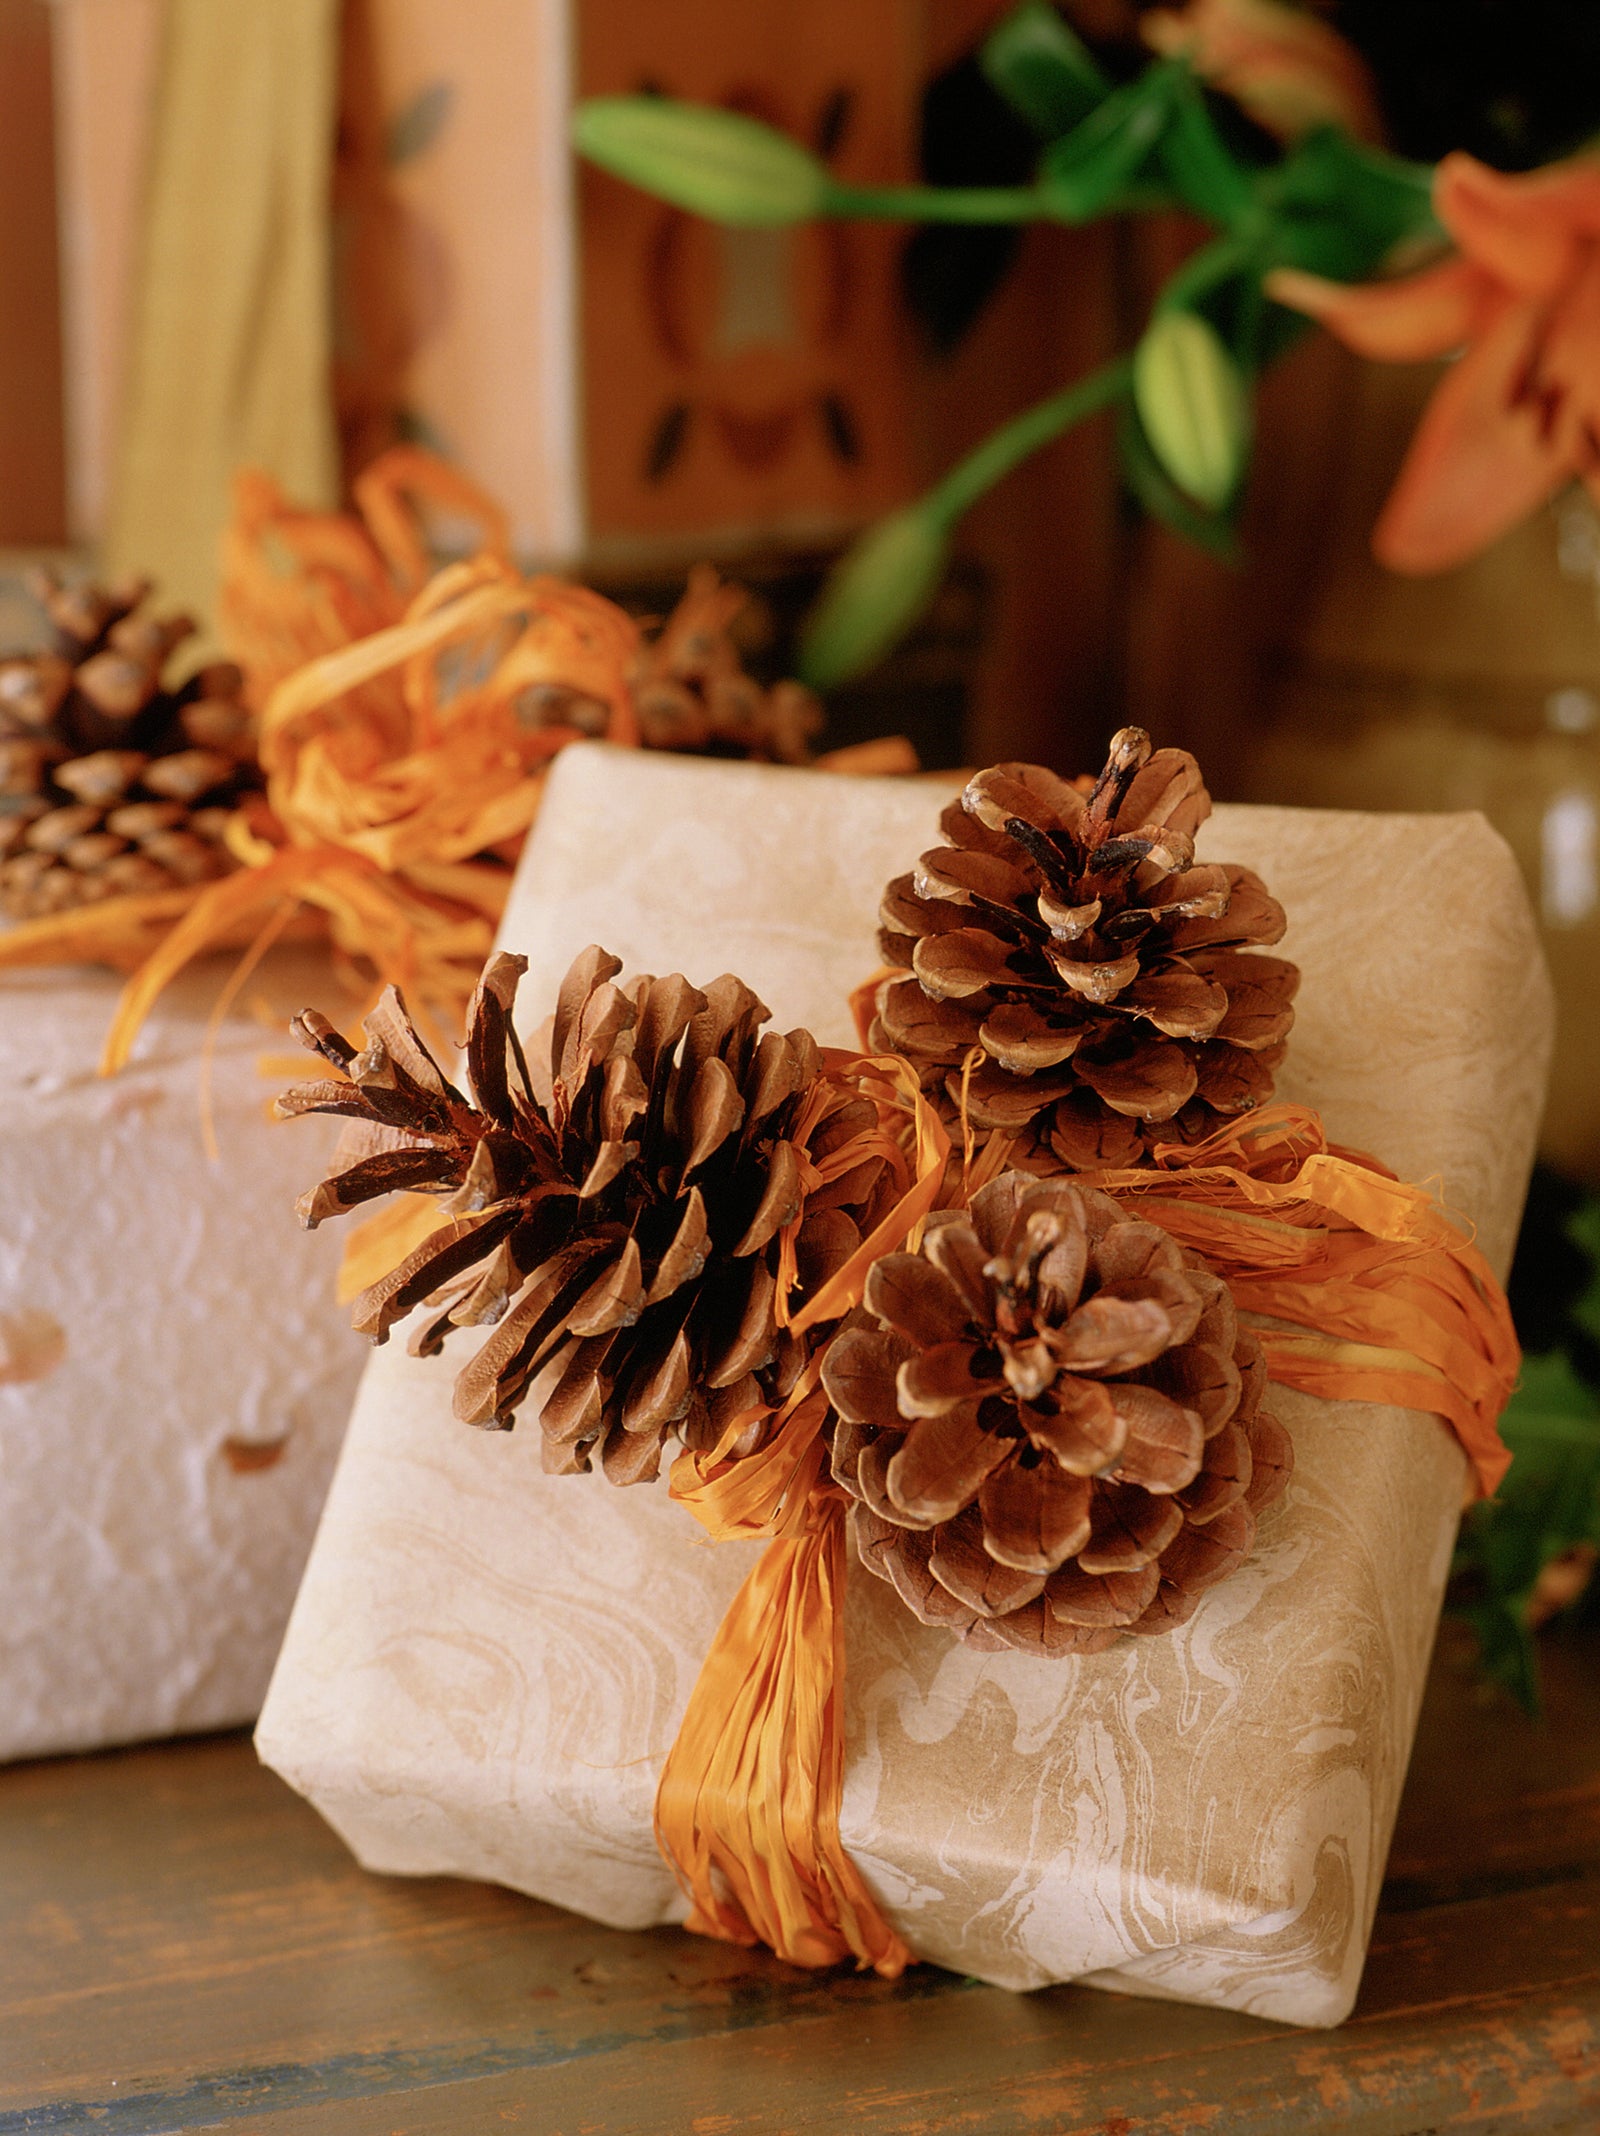 Traditional fragrant Christmas decorations: rustic gift wrapped present with marbled paper, pinecones and orange raffia ribbon